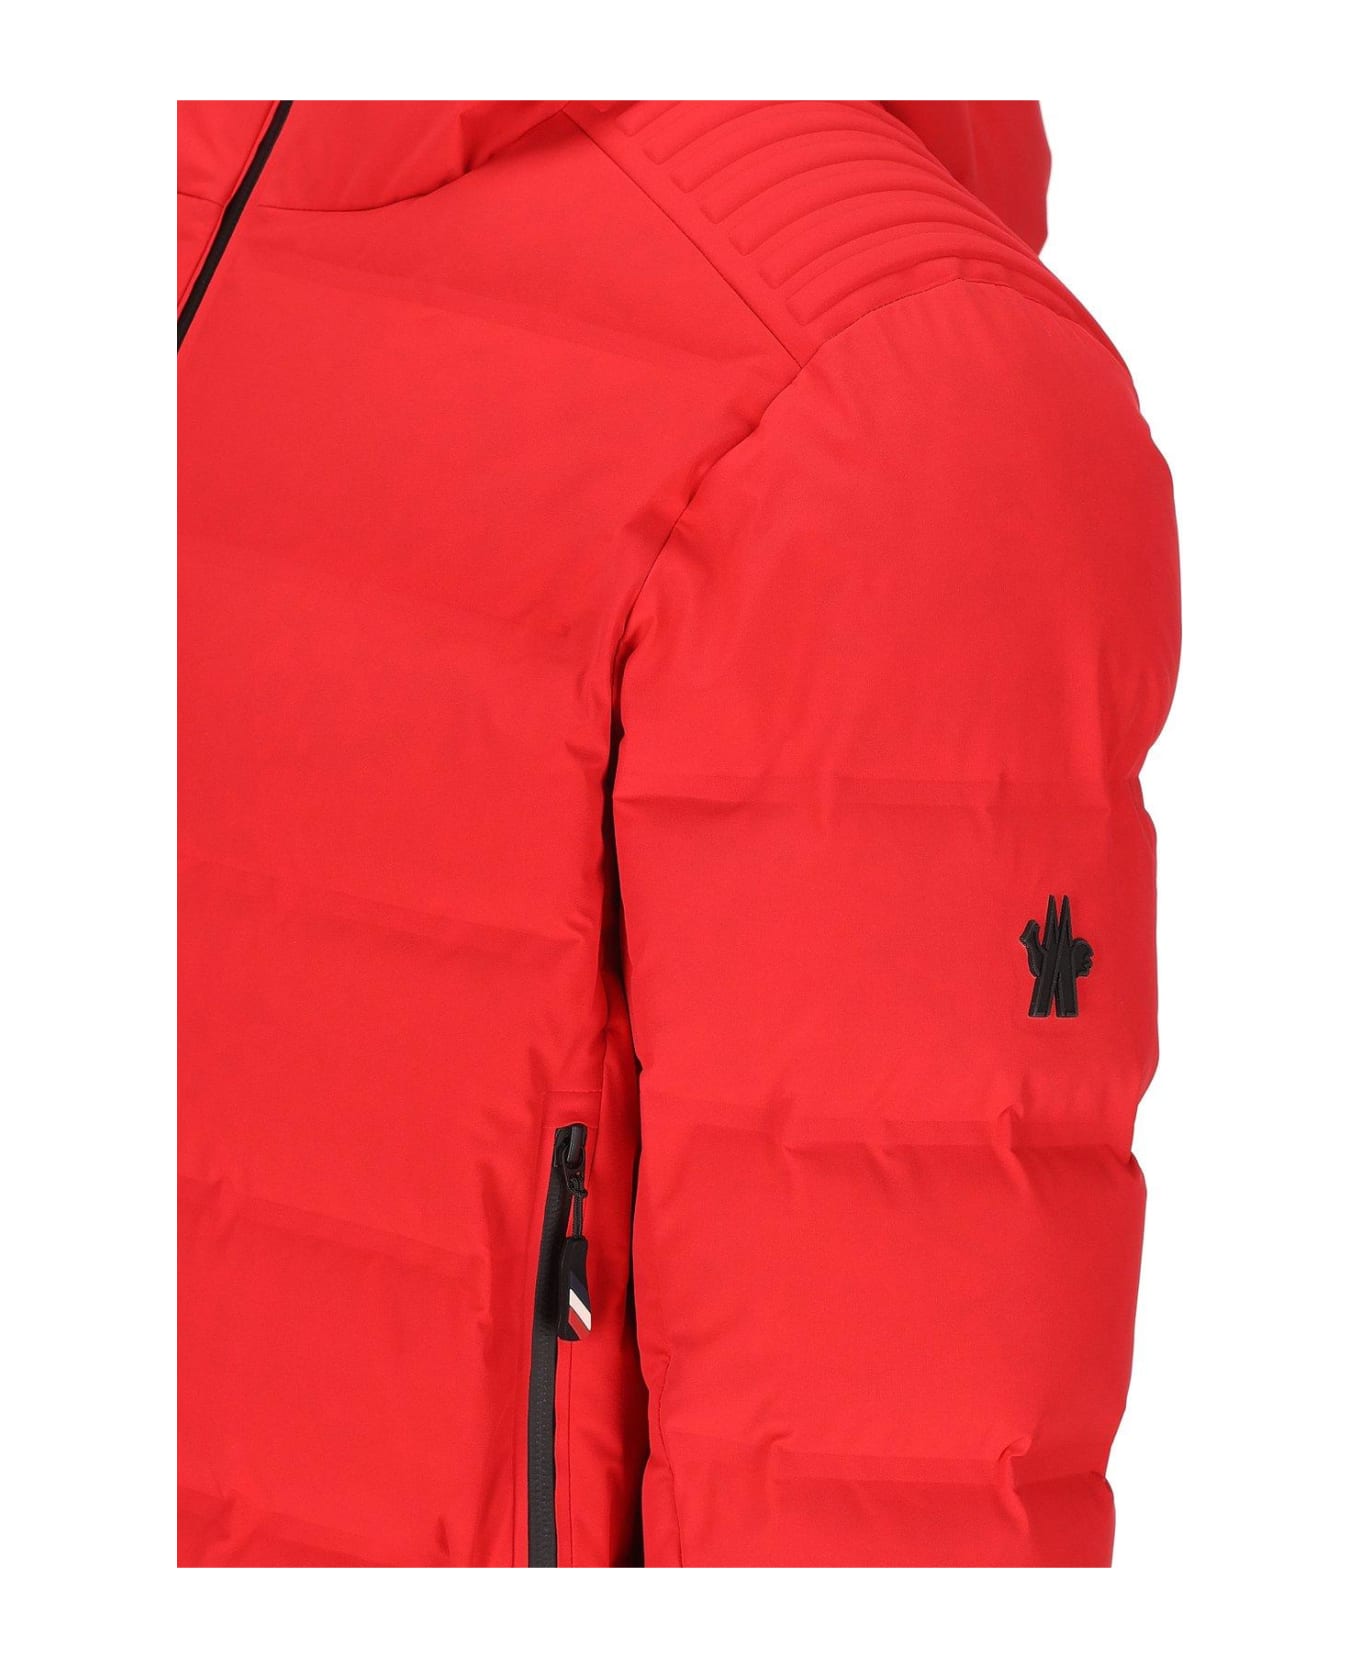 Moncler Grenoble Red Lagorai Short Down Jacket - Red